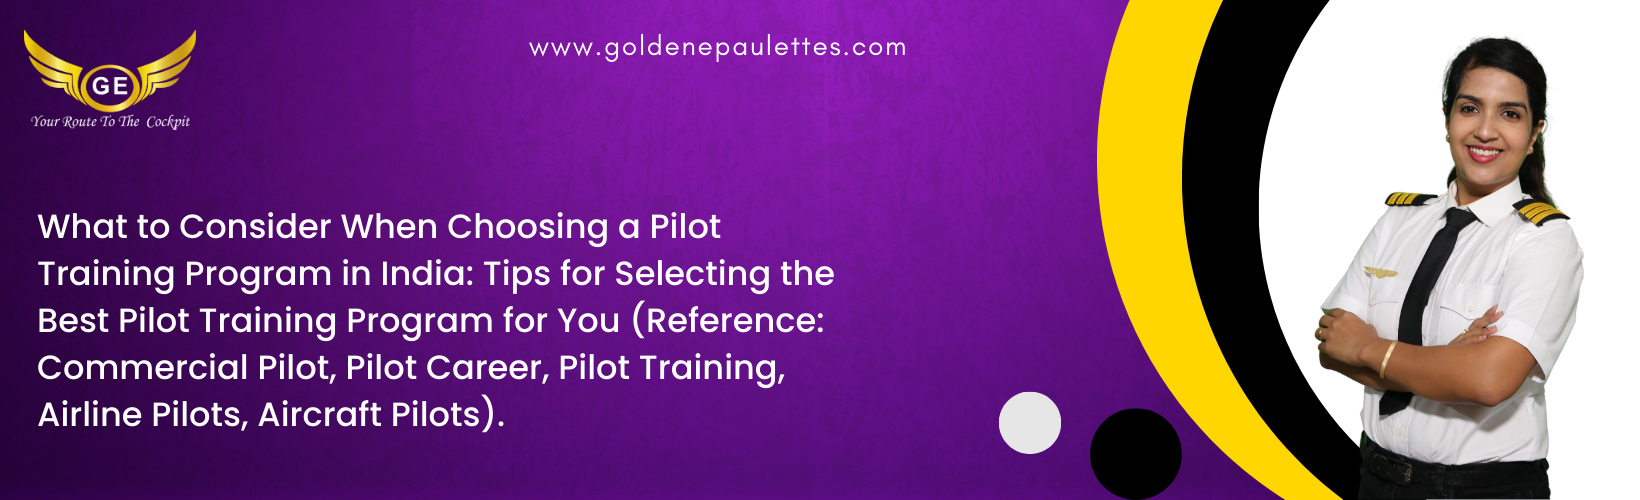 What to Look for When Choosing a Pilot Training Program in India